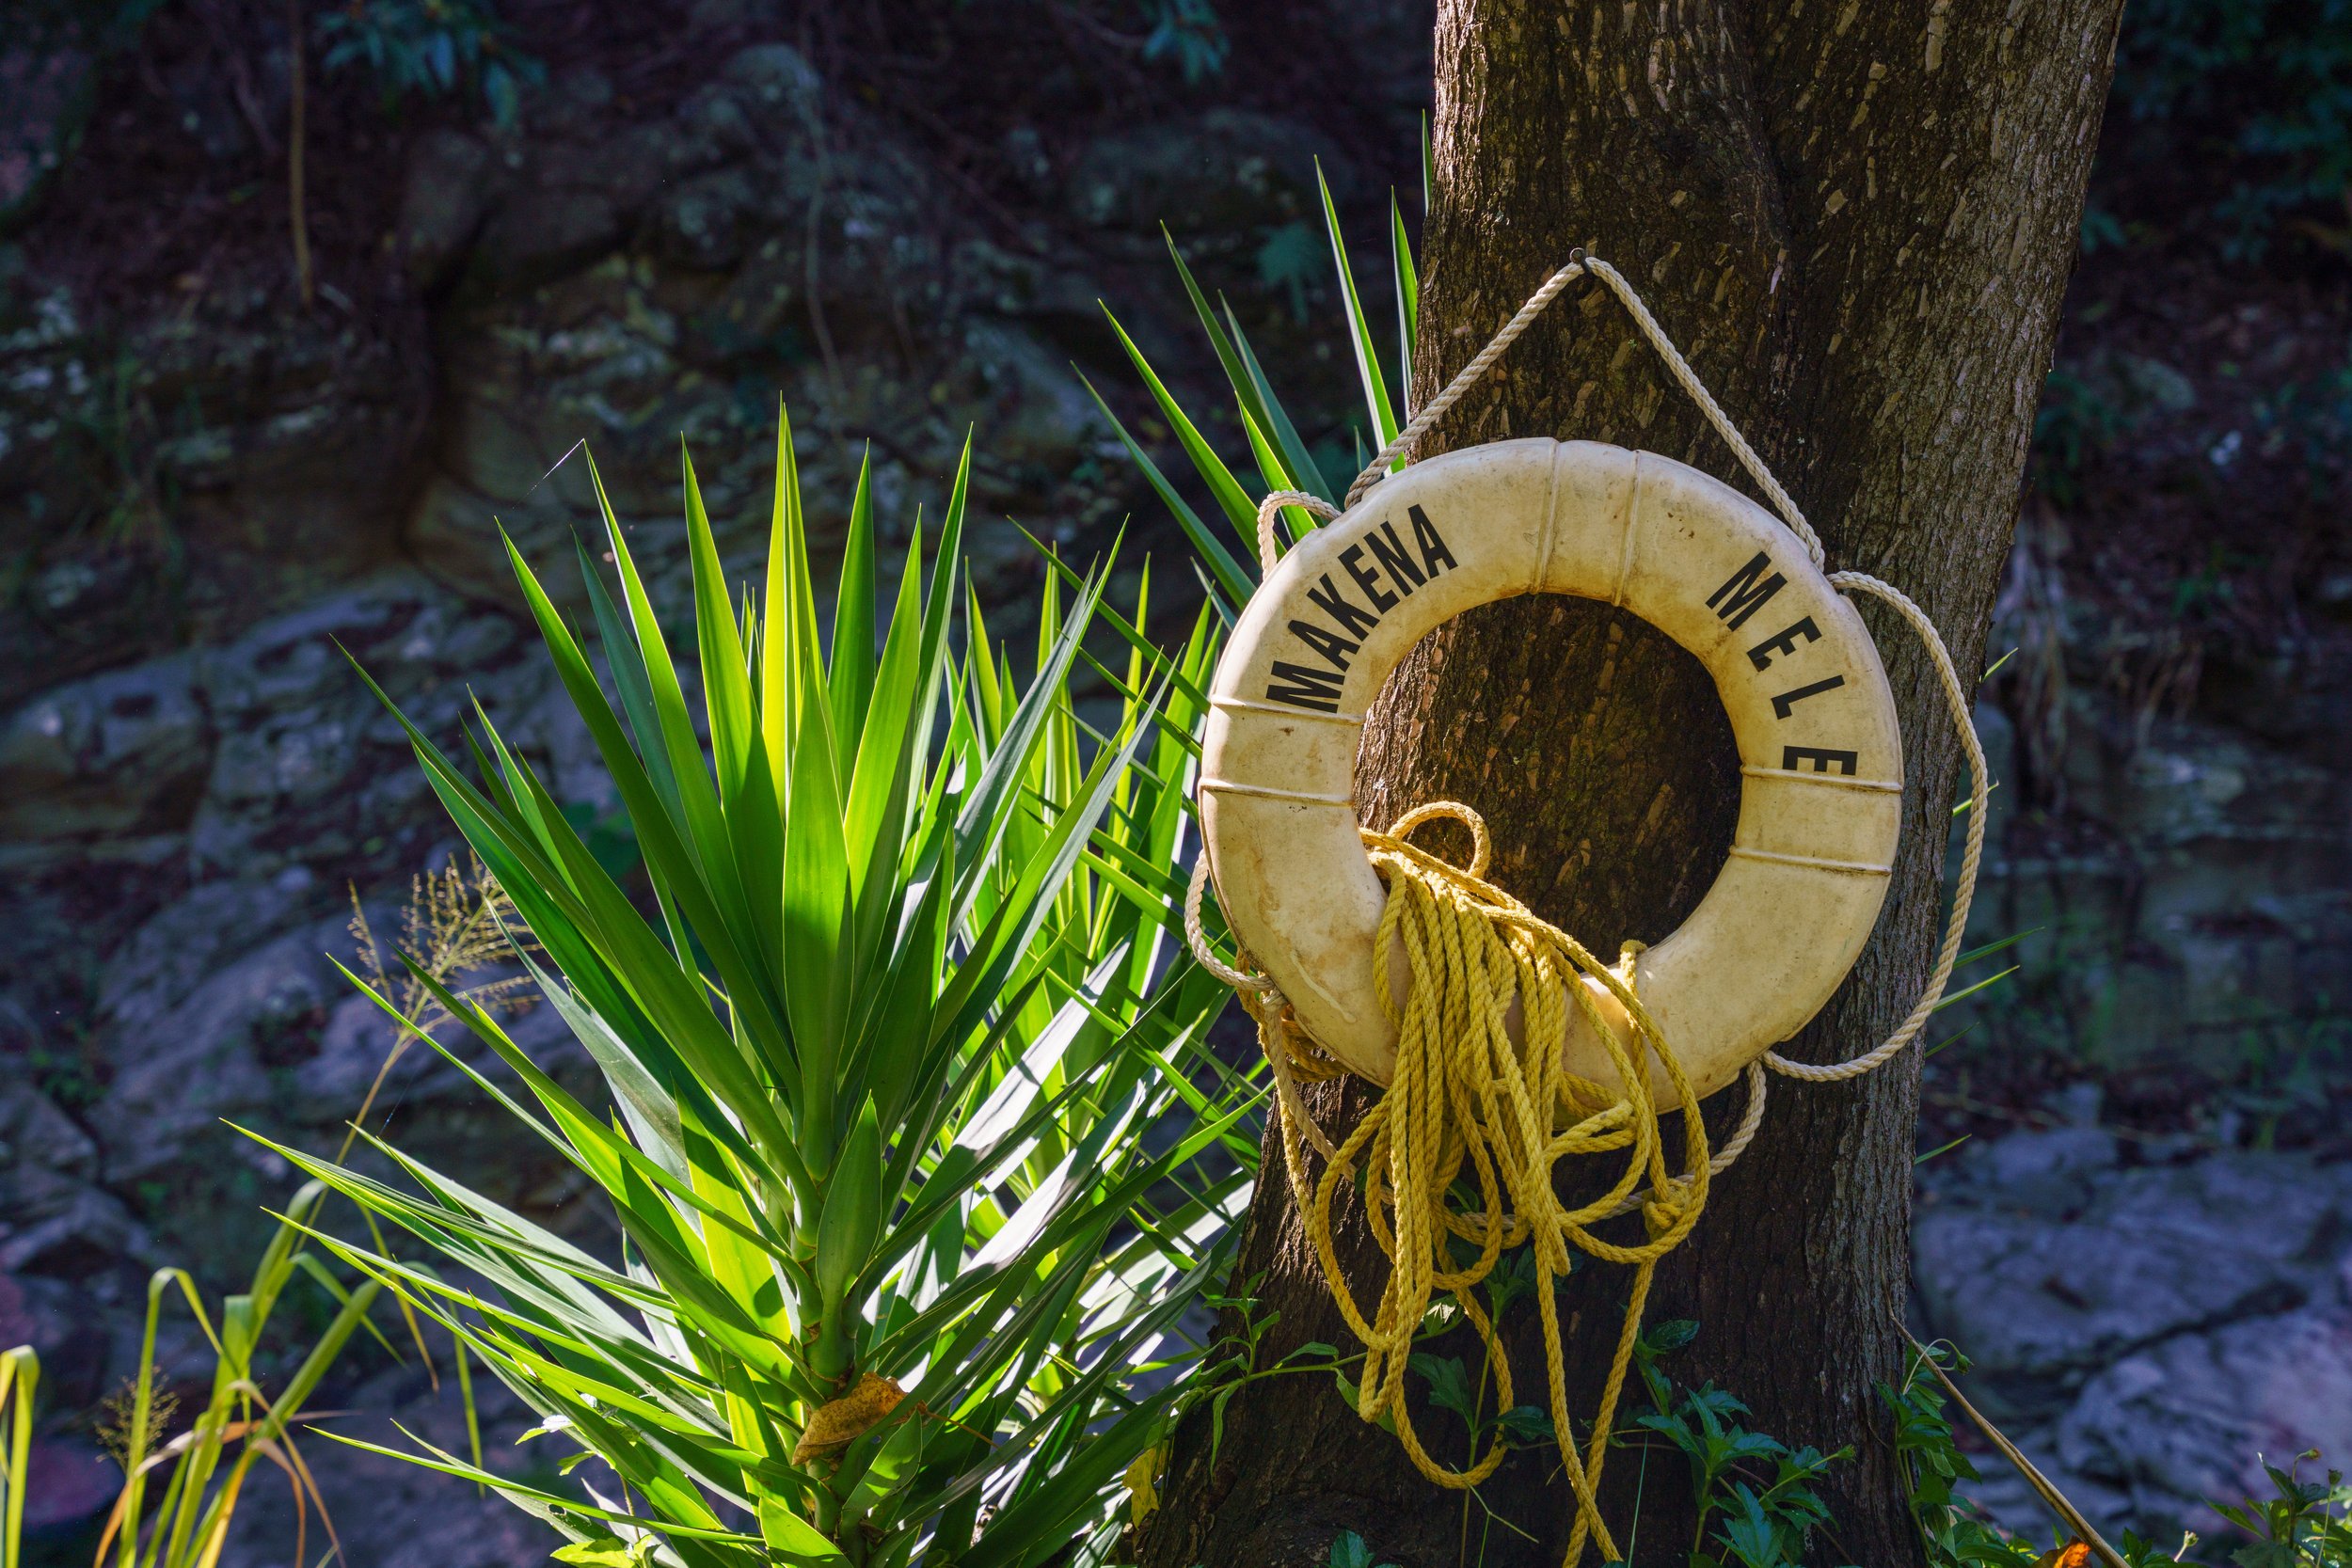  A lifebuoy at one of the swimming holes 